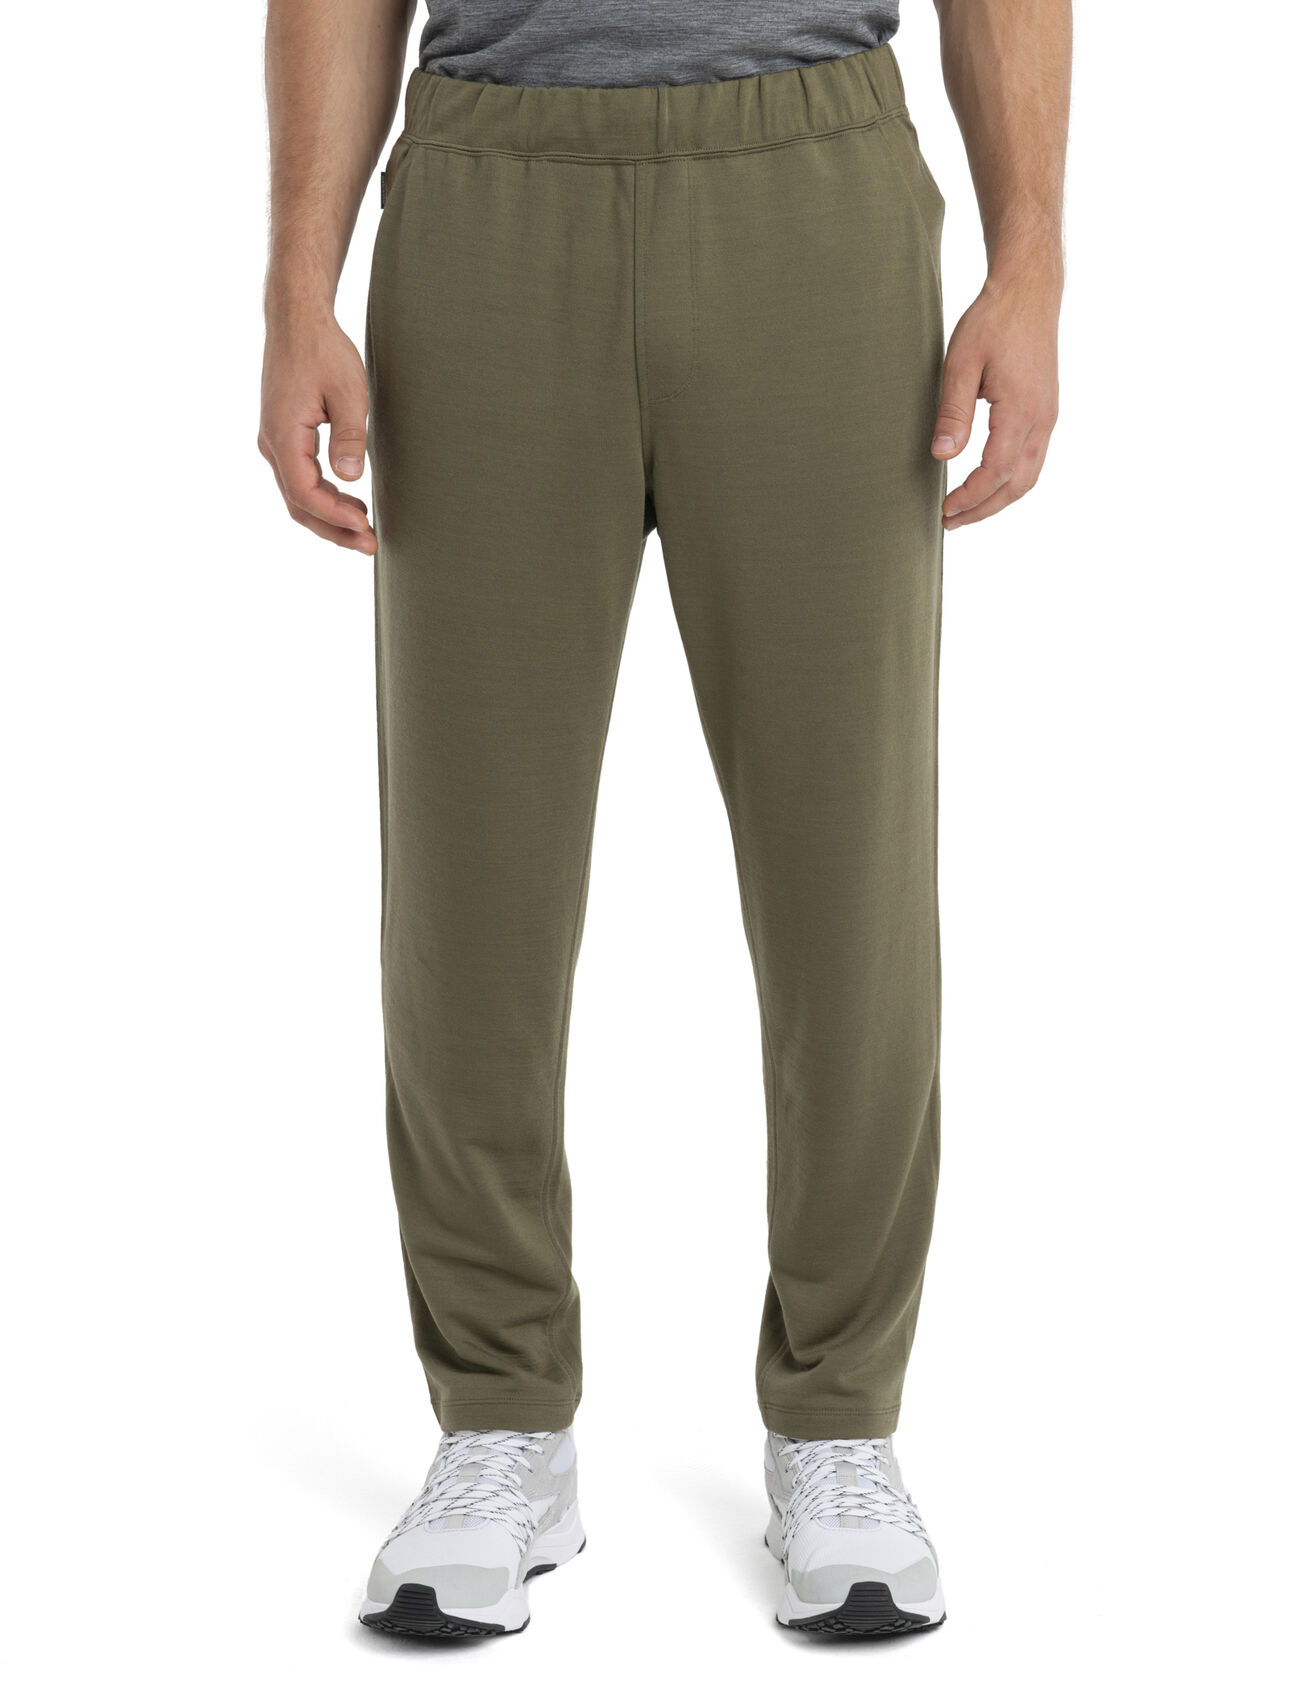 Mens Merino Shifter II Straight Pants The ultimate before and after bottoms made with our Eucaform terry fabric that blends merino wool and TENCEL™ Lyocell, the Shifter II Straight Pants have down time covered.